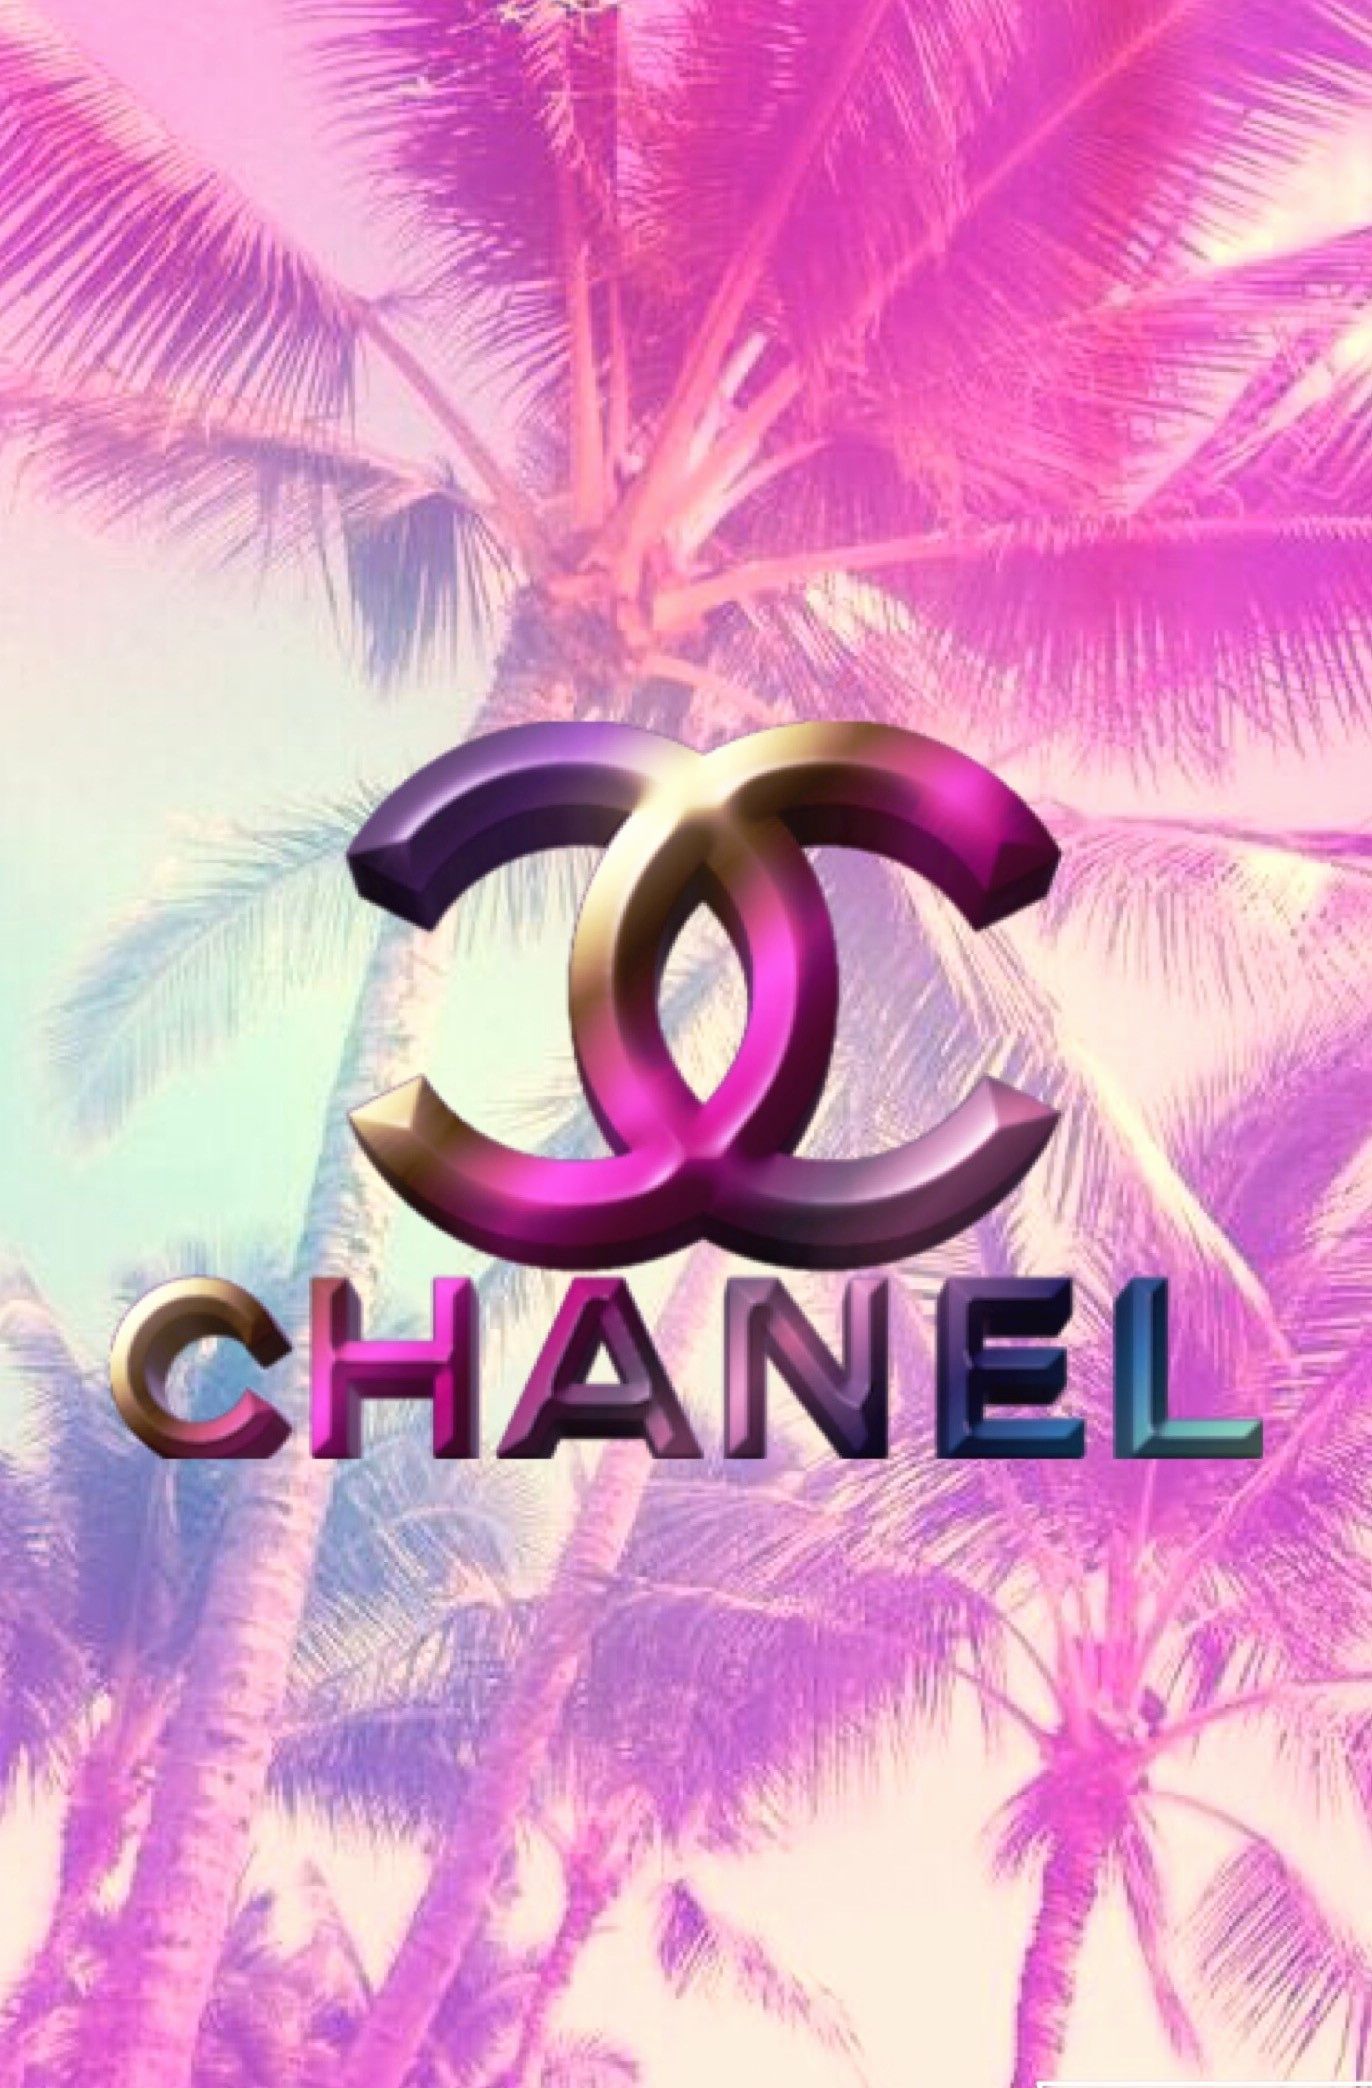 100+] Chanel Logo Wallpapers